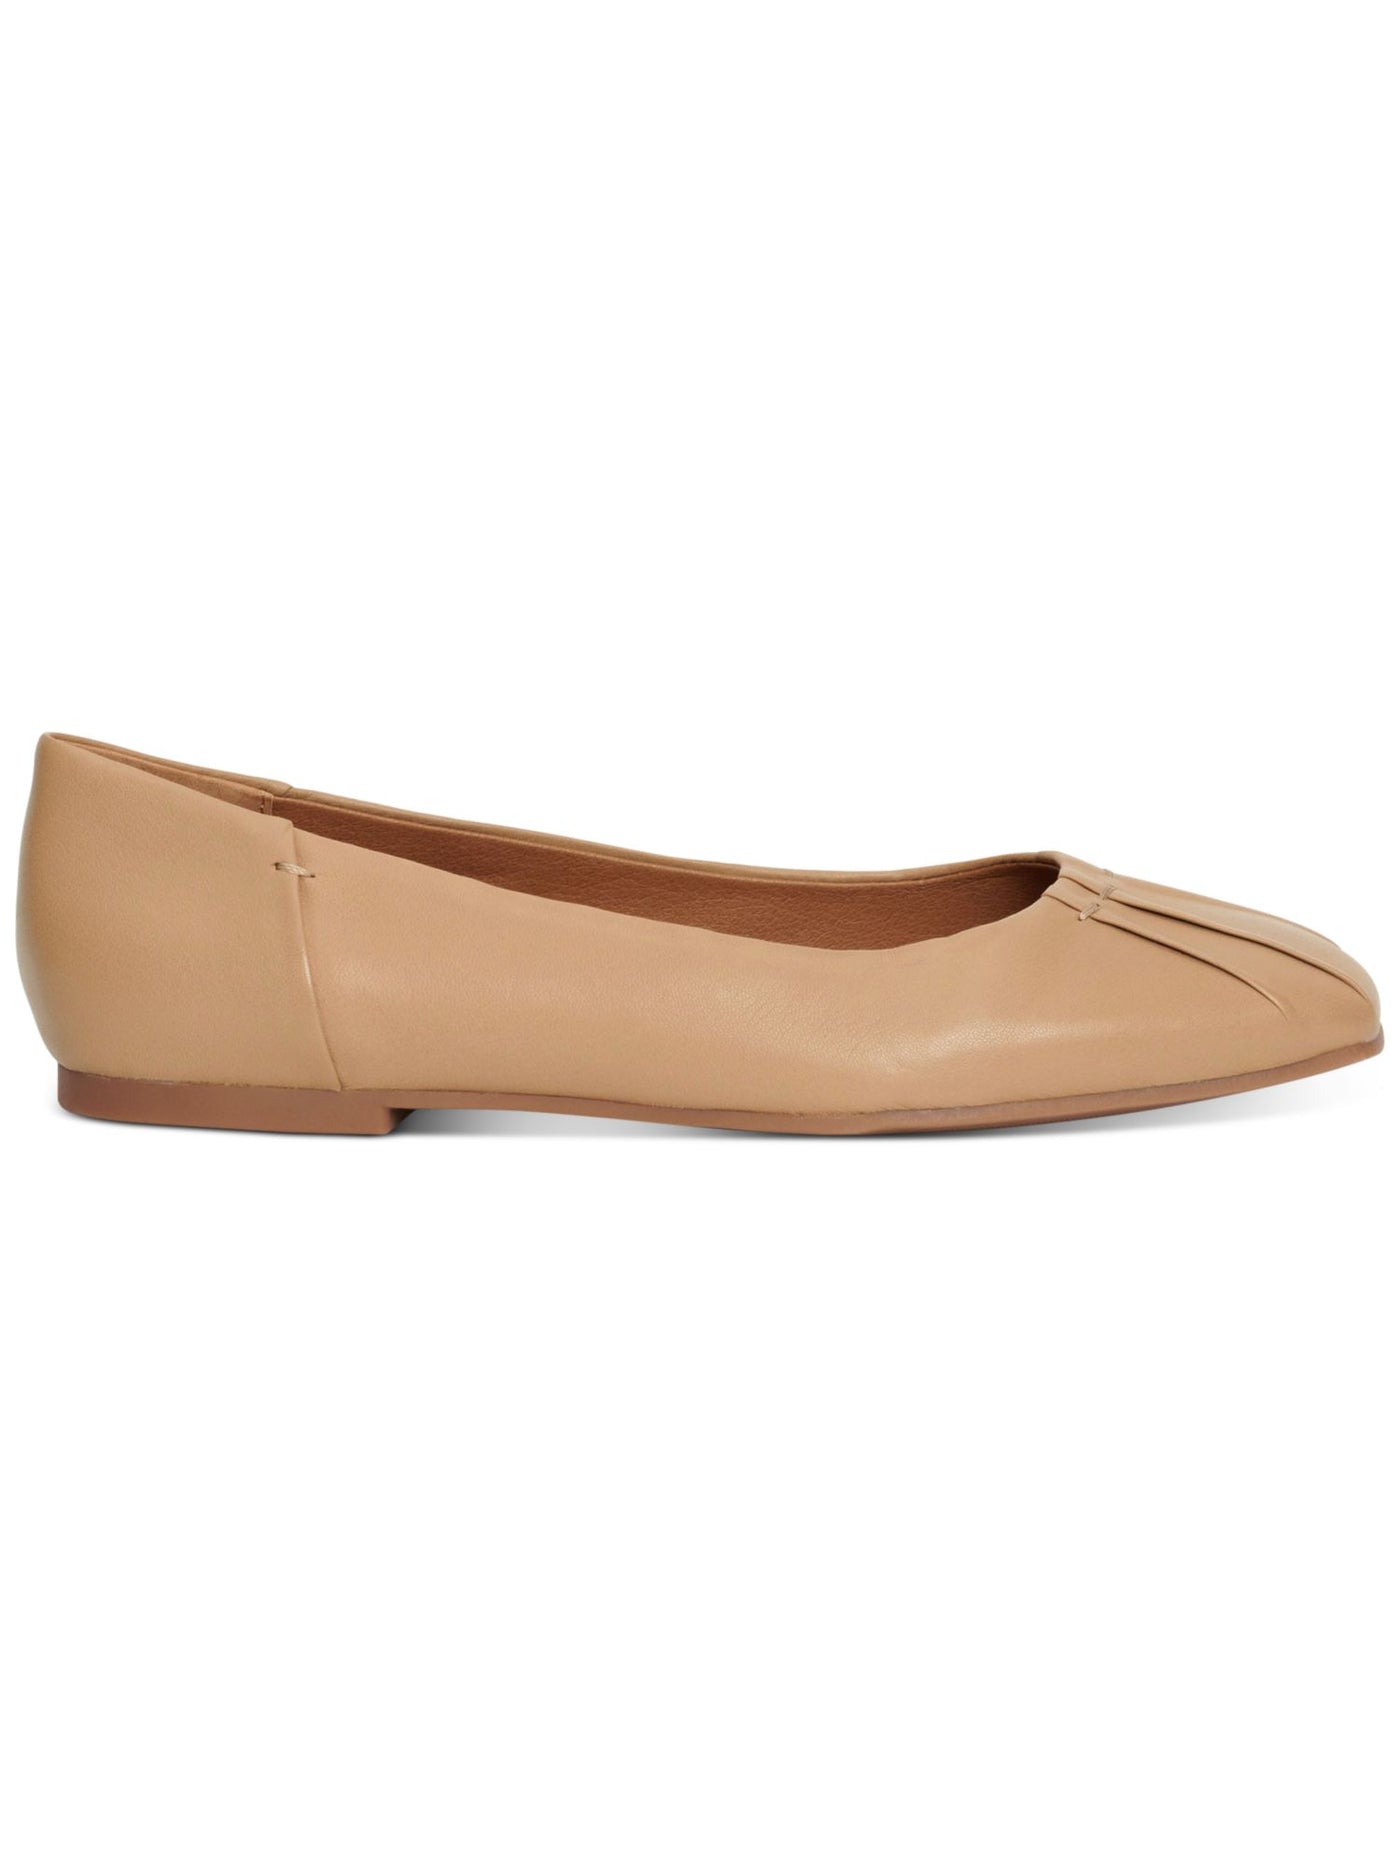 LUCKY BRAND Womens Beige Pleated Devir Square Toe Slip On Leather Ballet Flats 6.5 M